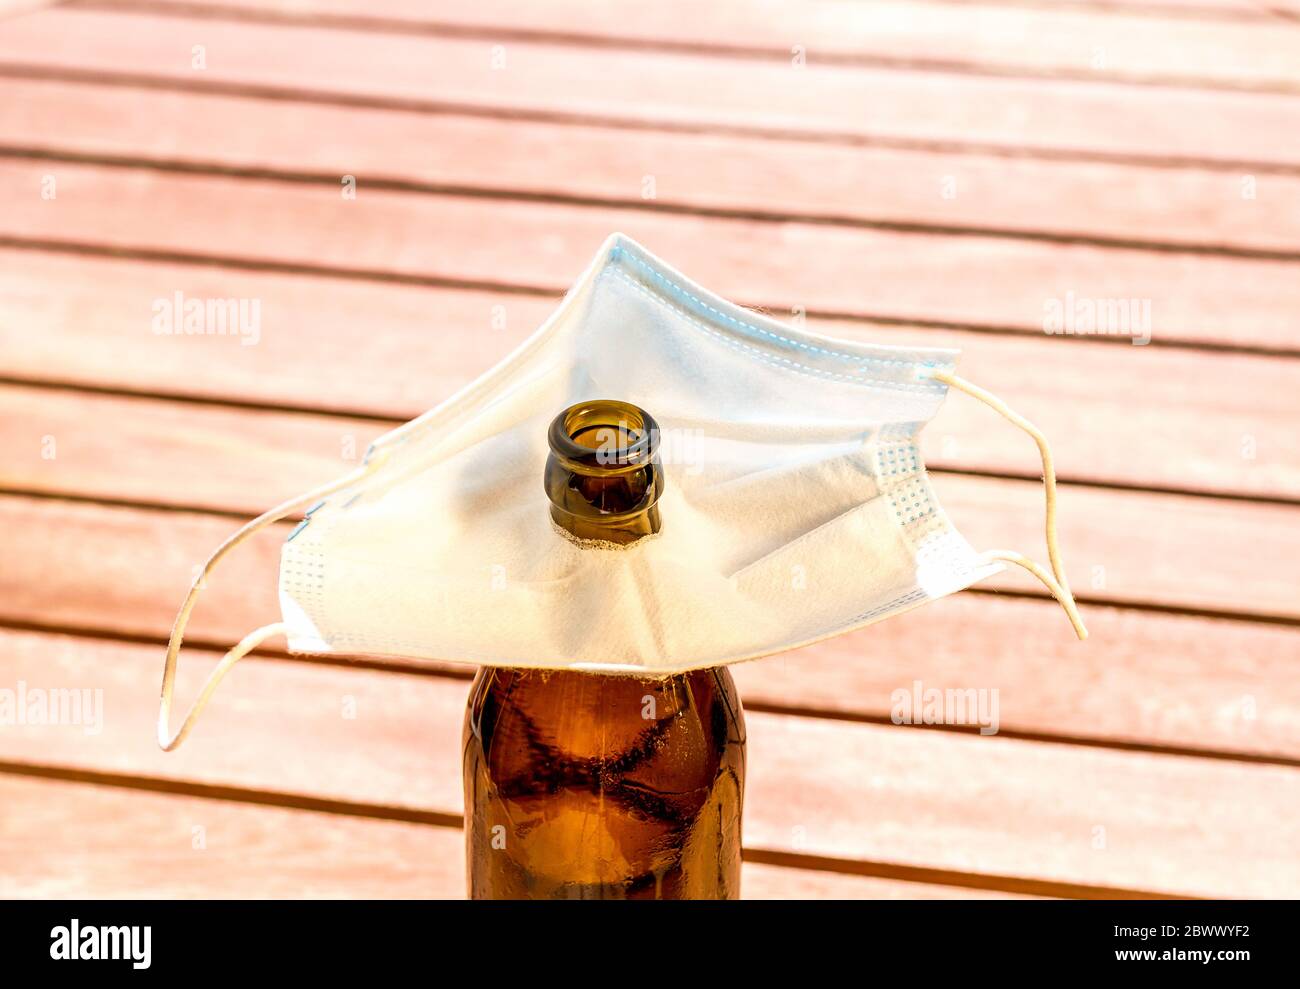 Brown beer bottle and face mask with hole for drinking, top view Stock Photo